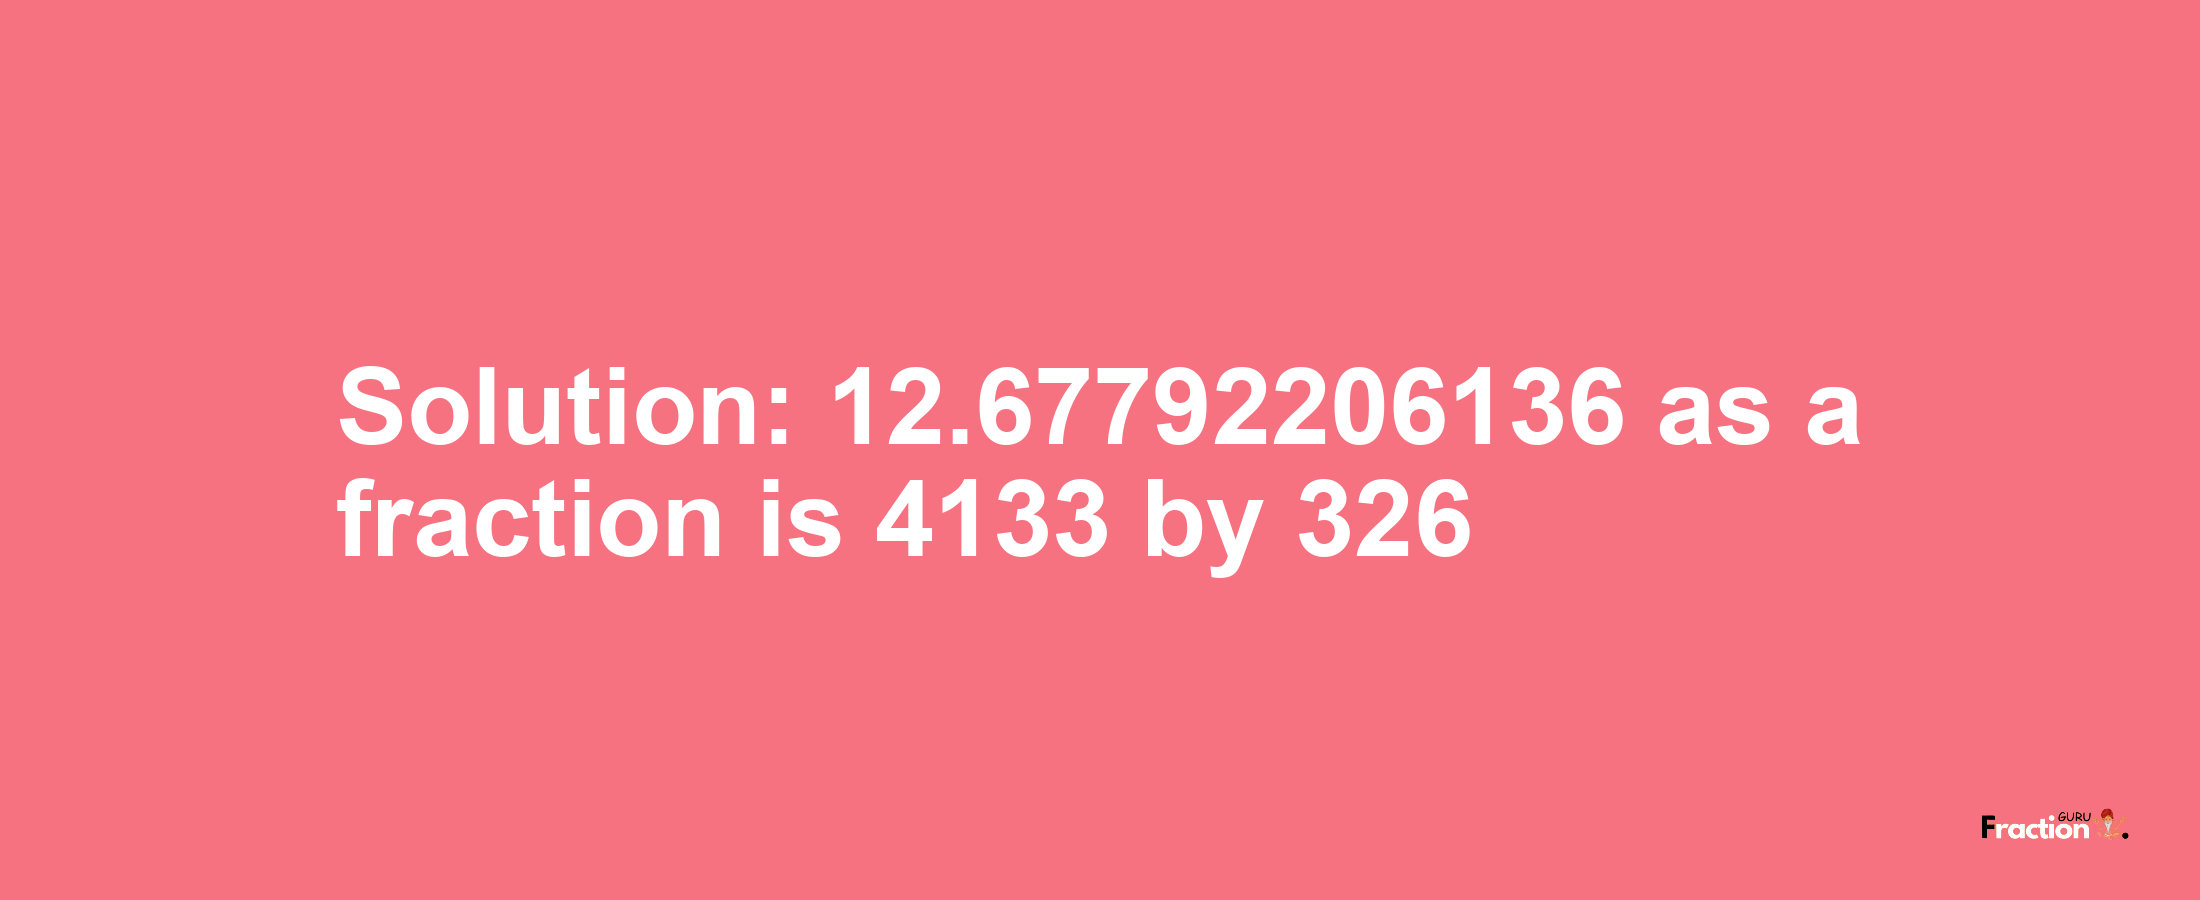 Solution:12.67792206136 as a fraction is 4133/326